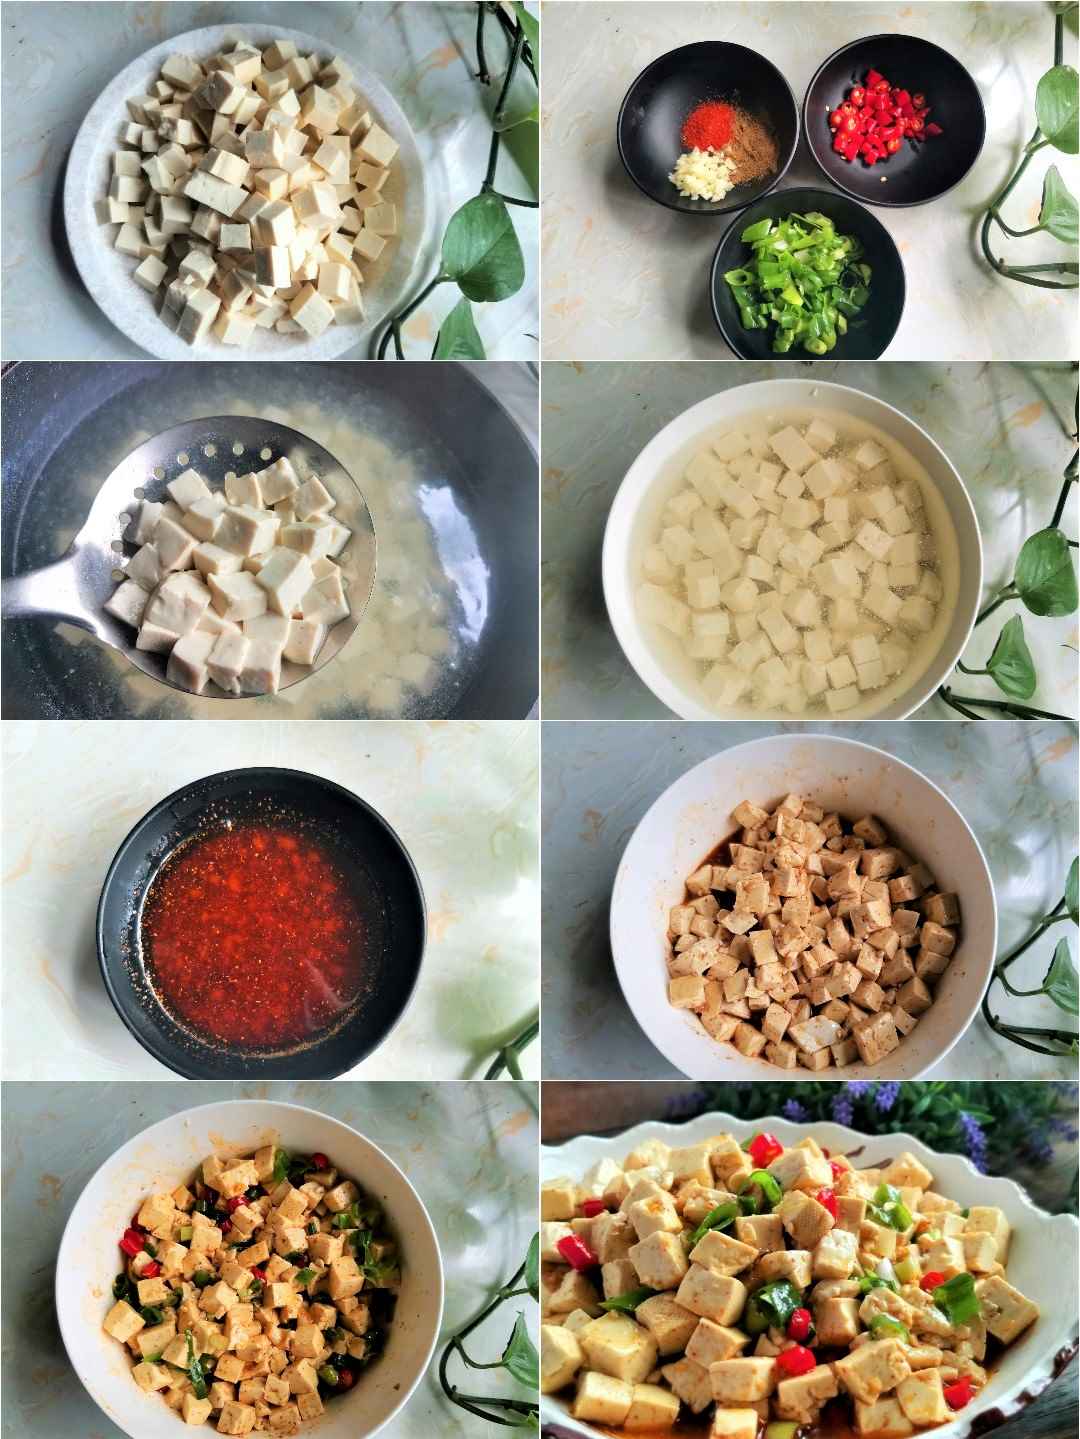 Picture steps for how to make tofu salad